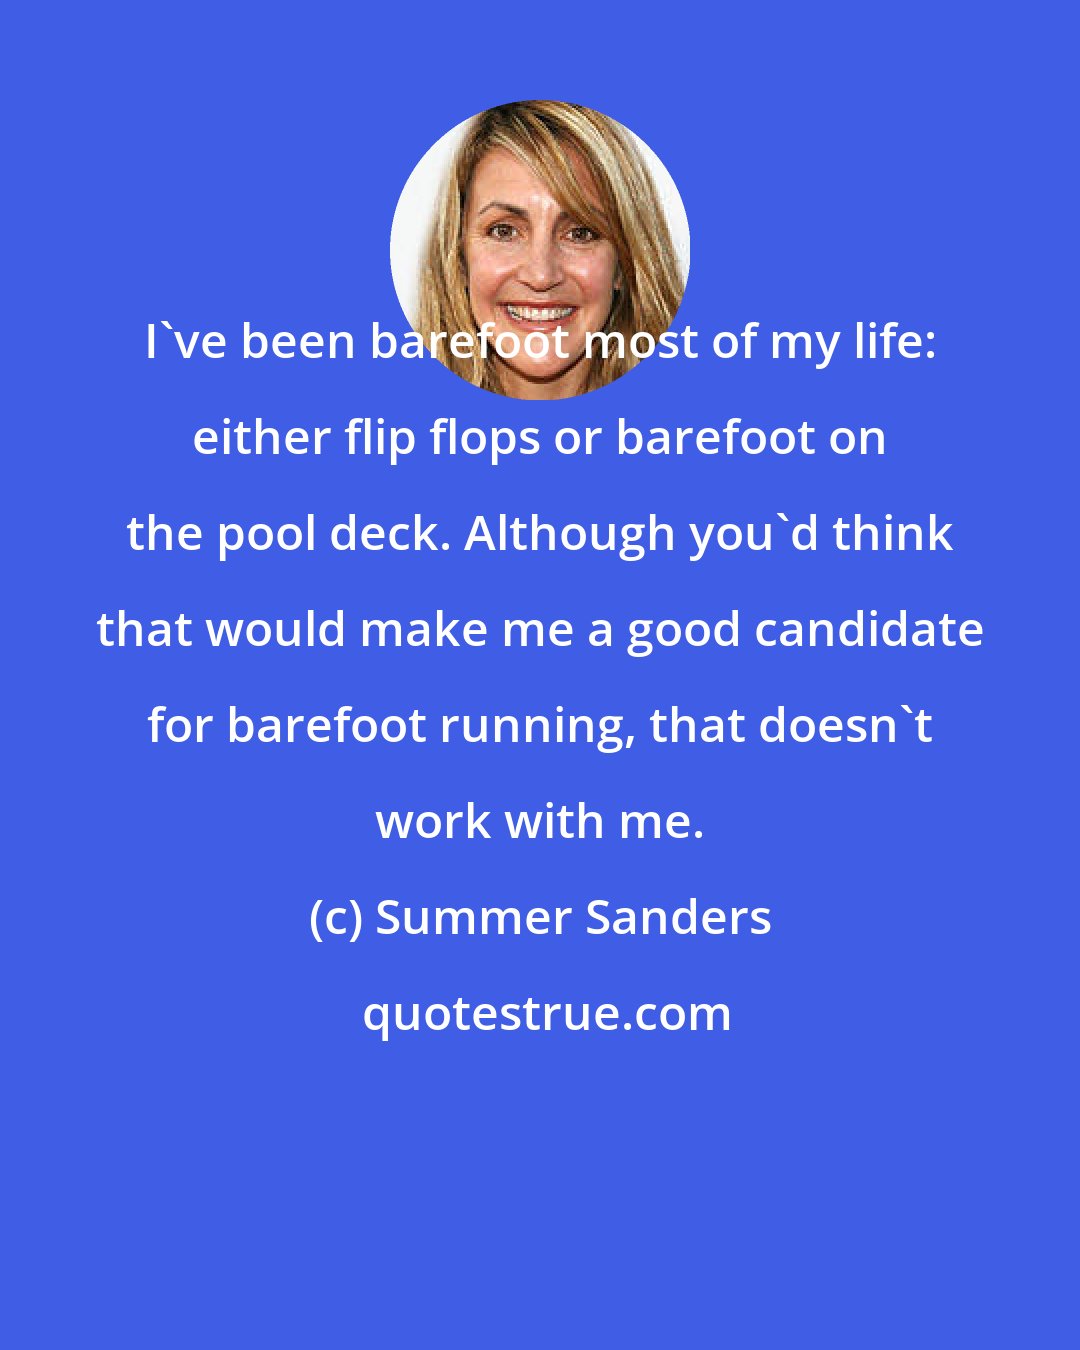 Summer Sanders: I've been barefoot most of my life: either flip flops or barefoot on the pool deck. Although you'd think that would make me a good candidate for barefoot running, that doesn't work with me.